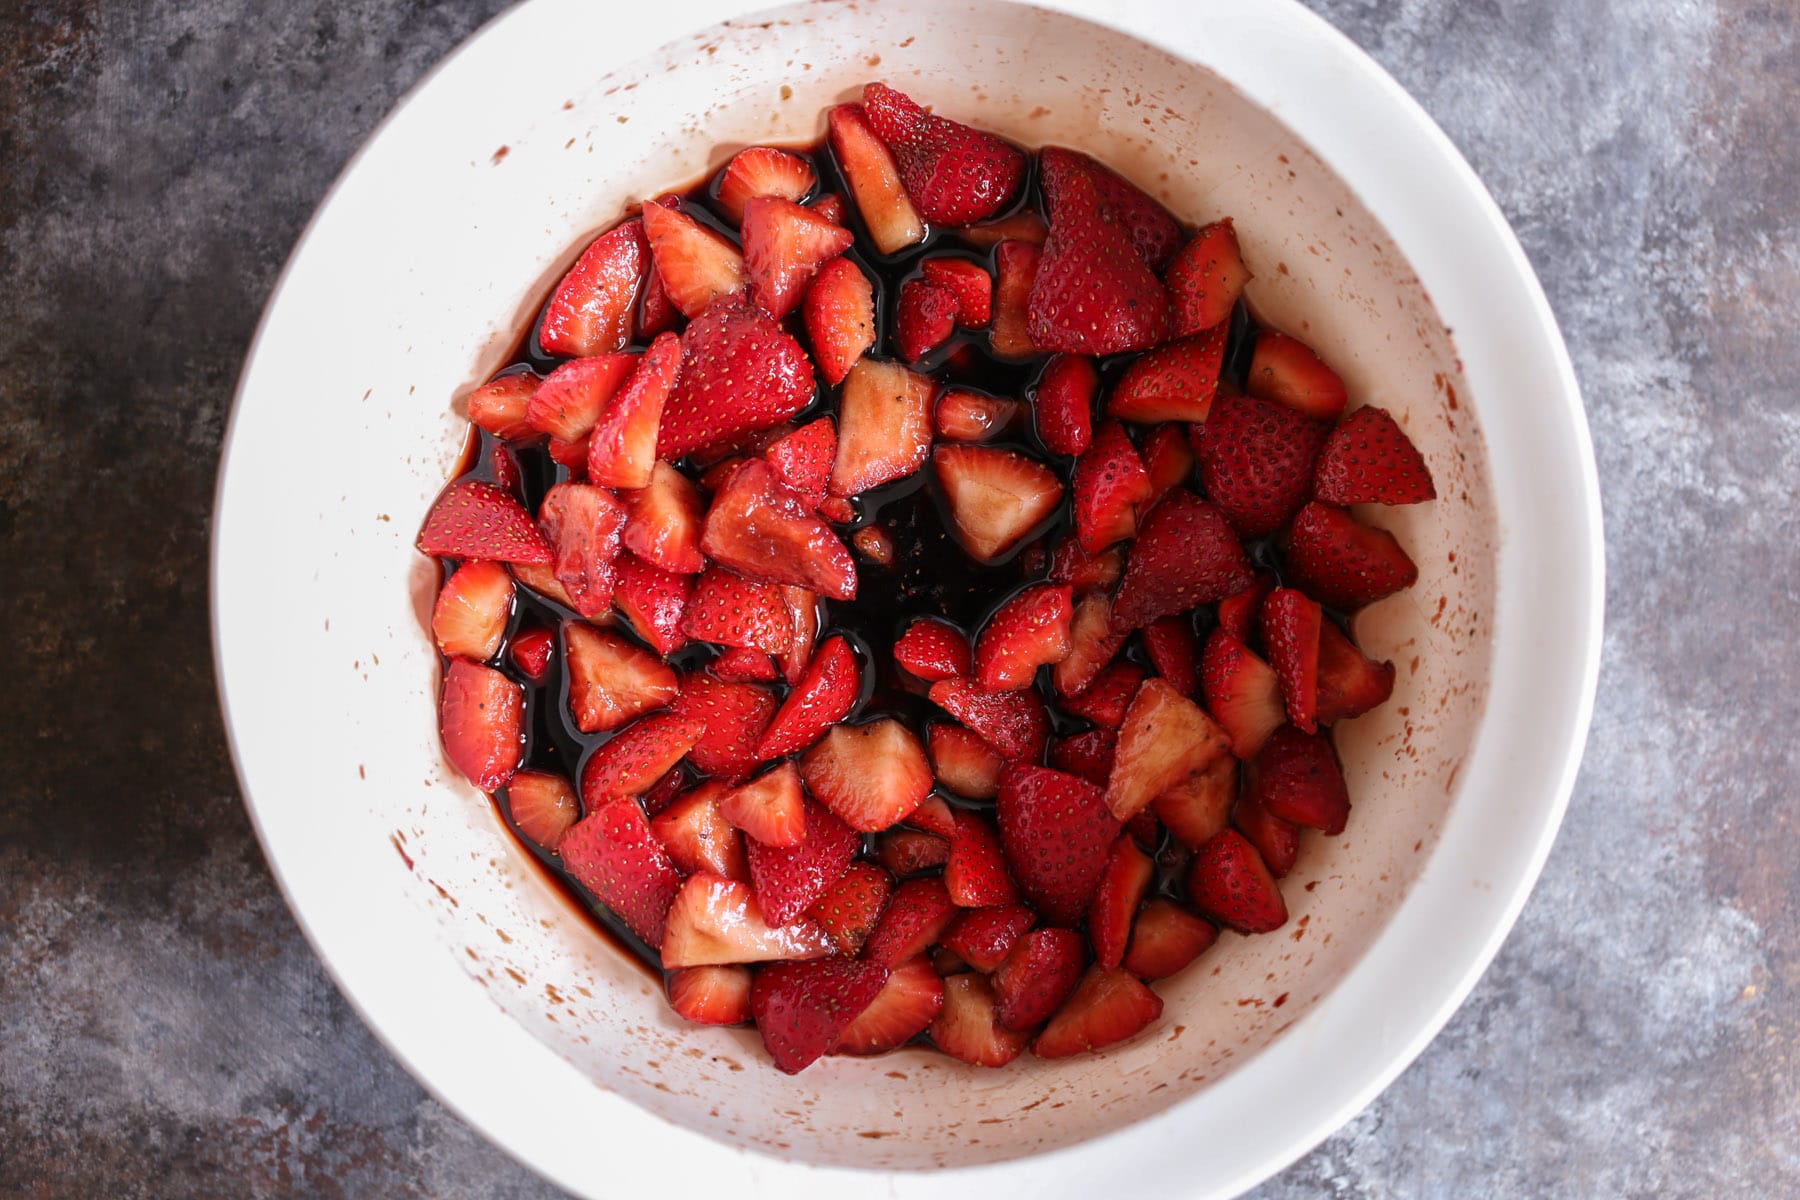 Grilled-Angel-Food-Cake-with-Whipped-Mascarpone-and-Balsamic-Black-Pepper-Strawberries-step-1